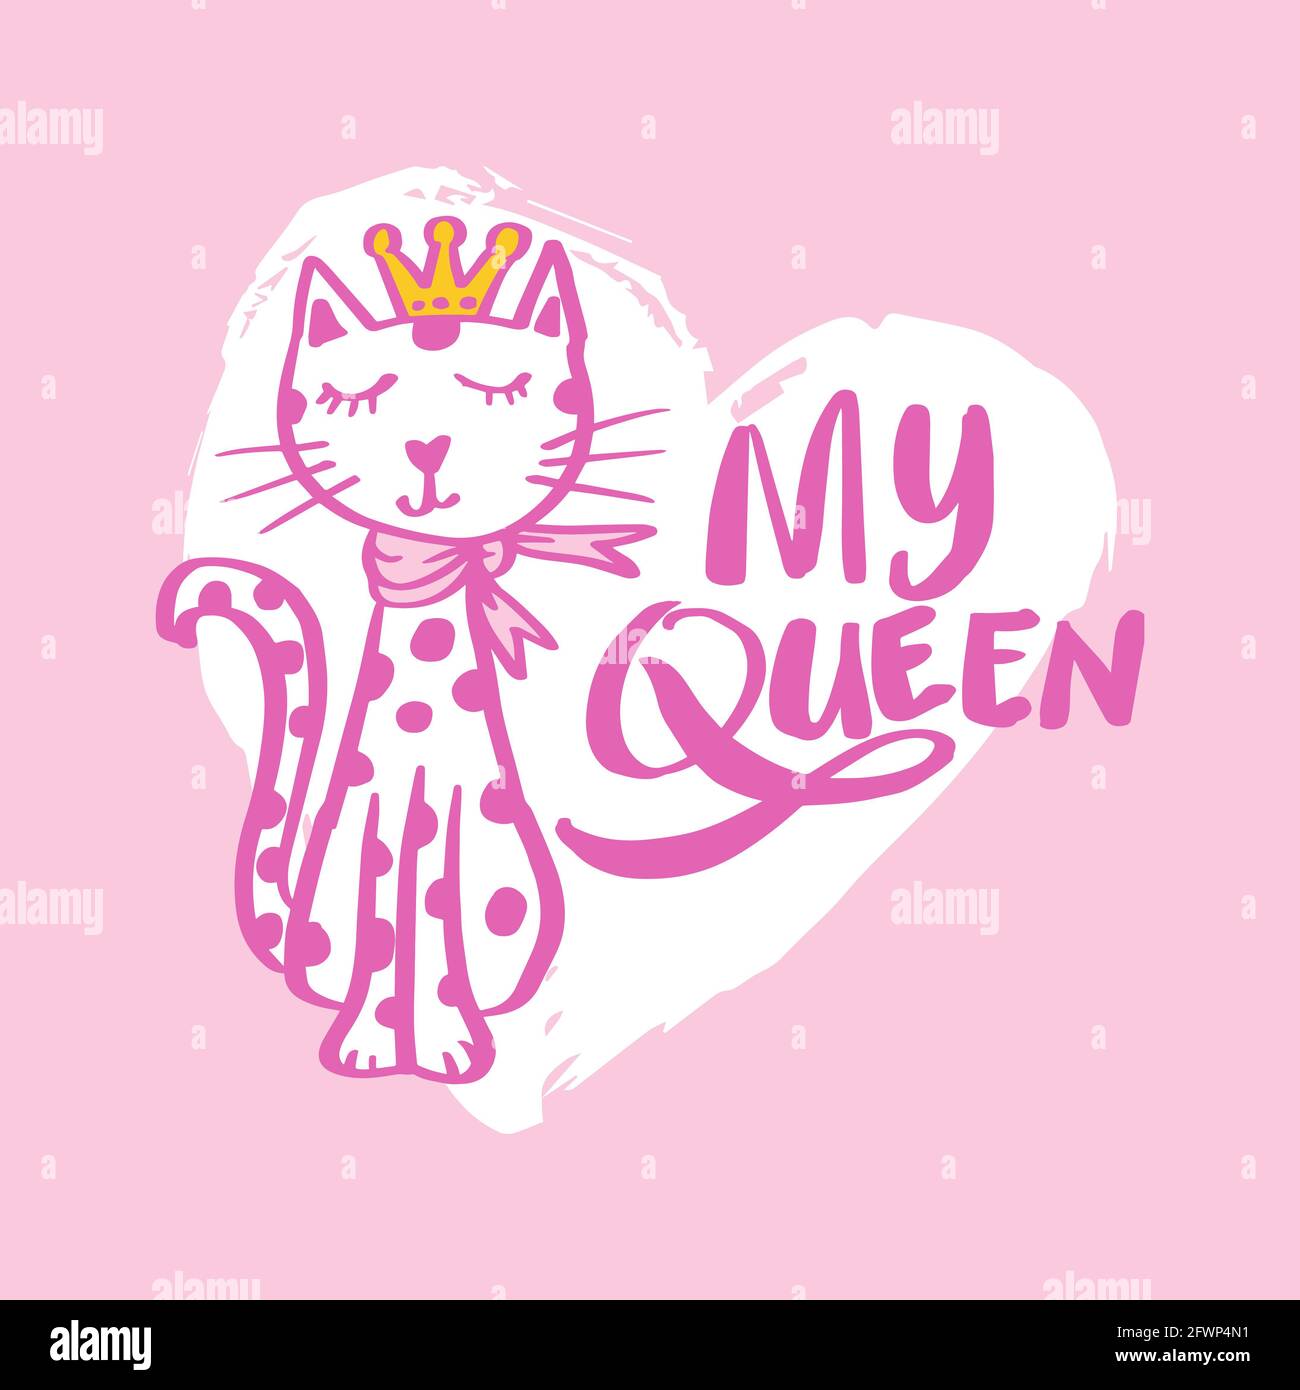 My Queen with hearts hand lettering. Fashion print cat face with crown. Stock Photo